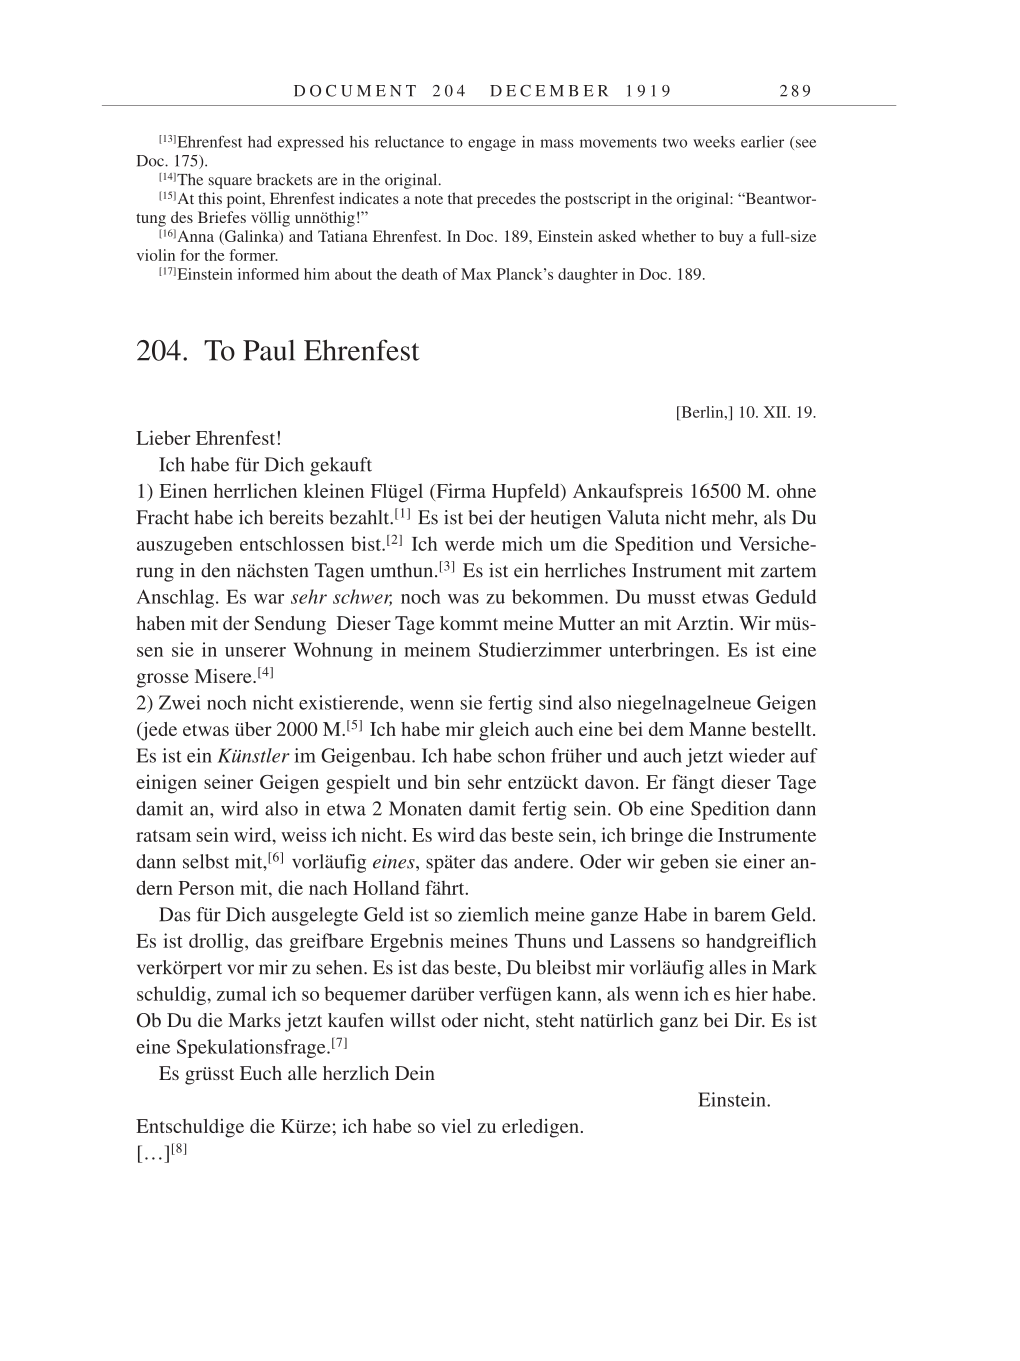 Volume 9: The Berlin Years: Correspondence January 1919-April 1920 page 289